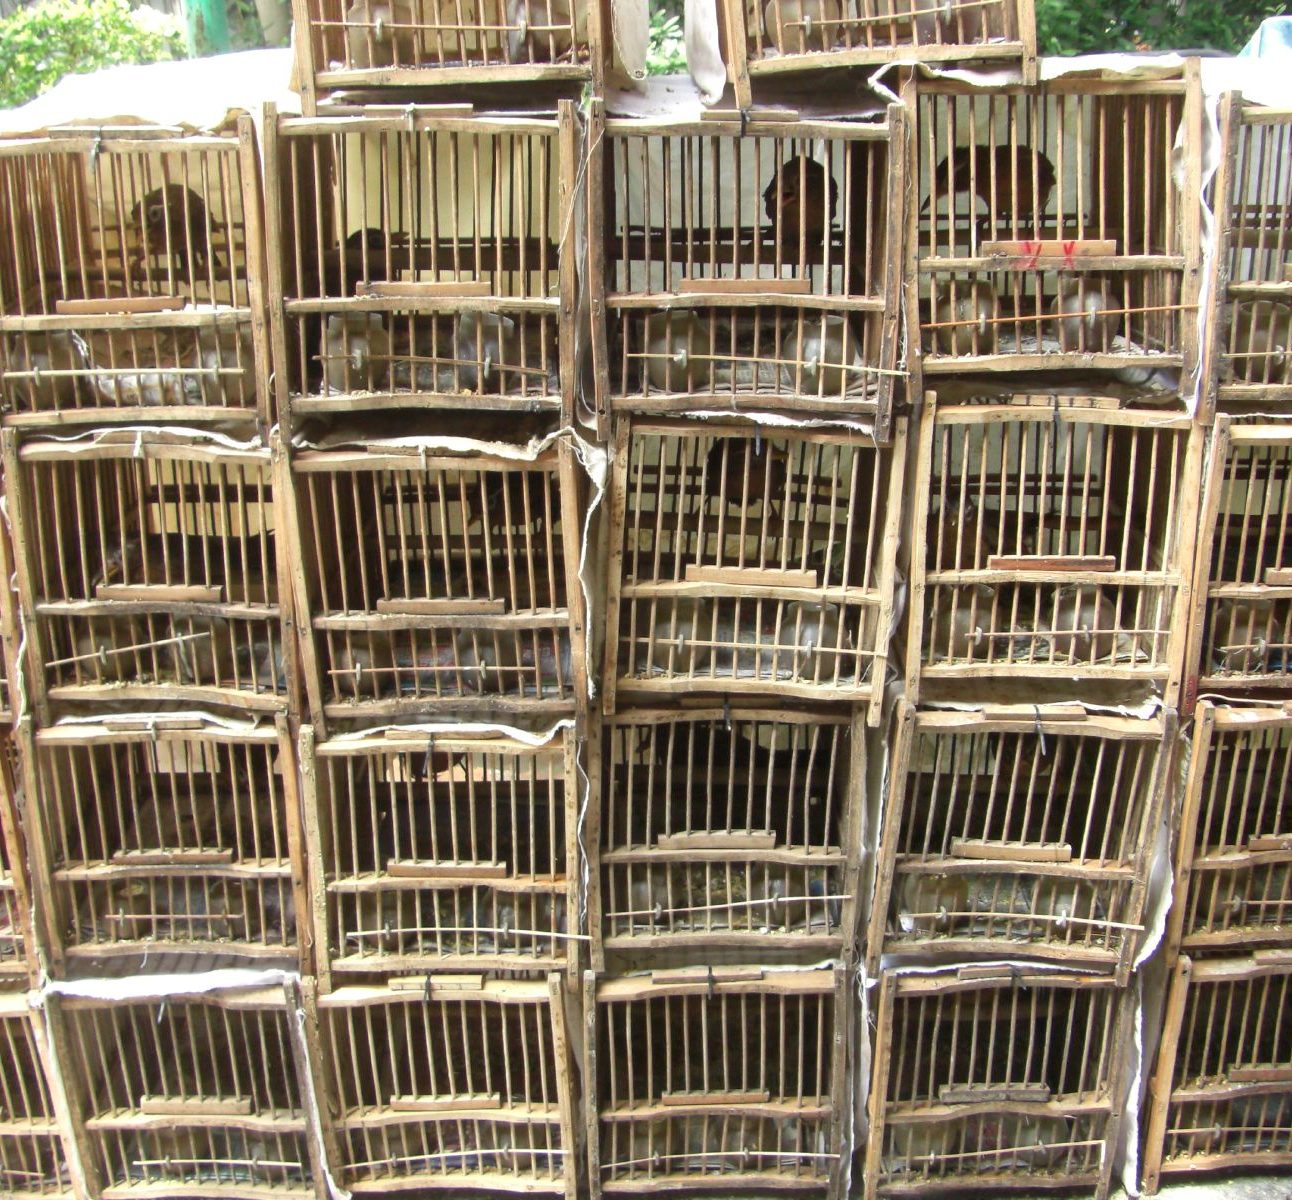 A large stack of cages of animals